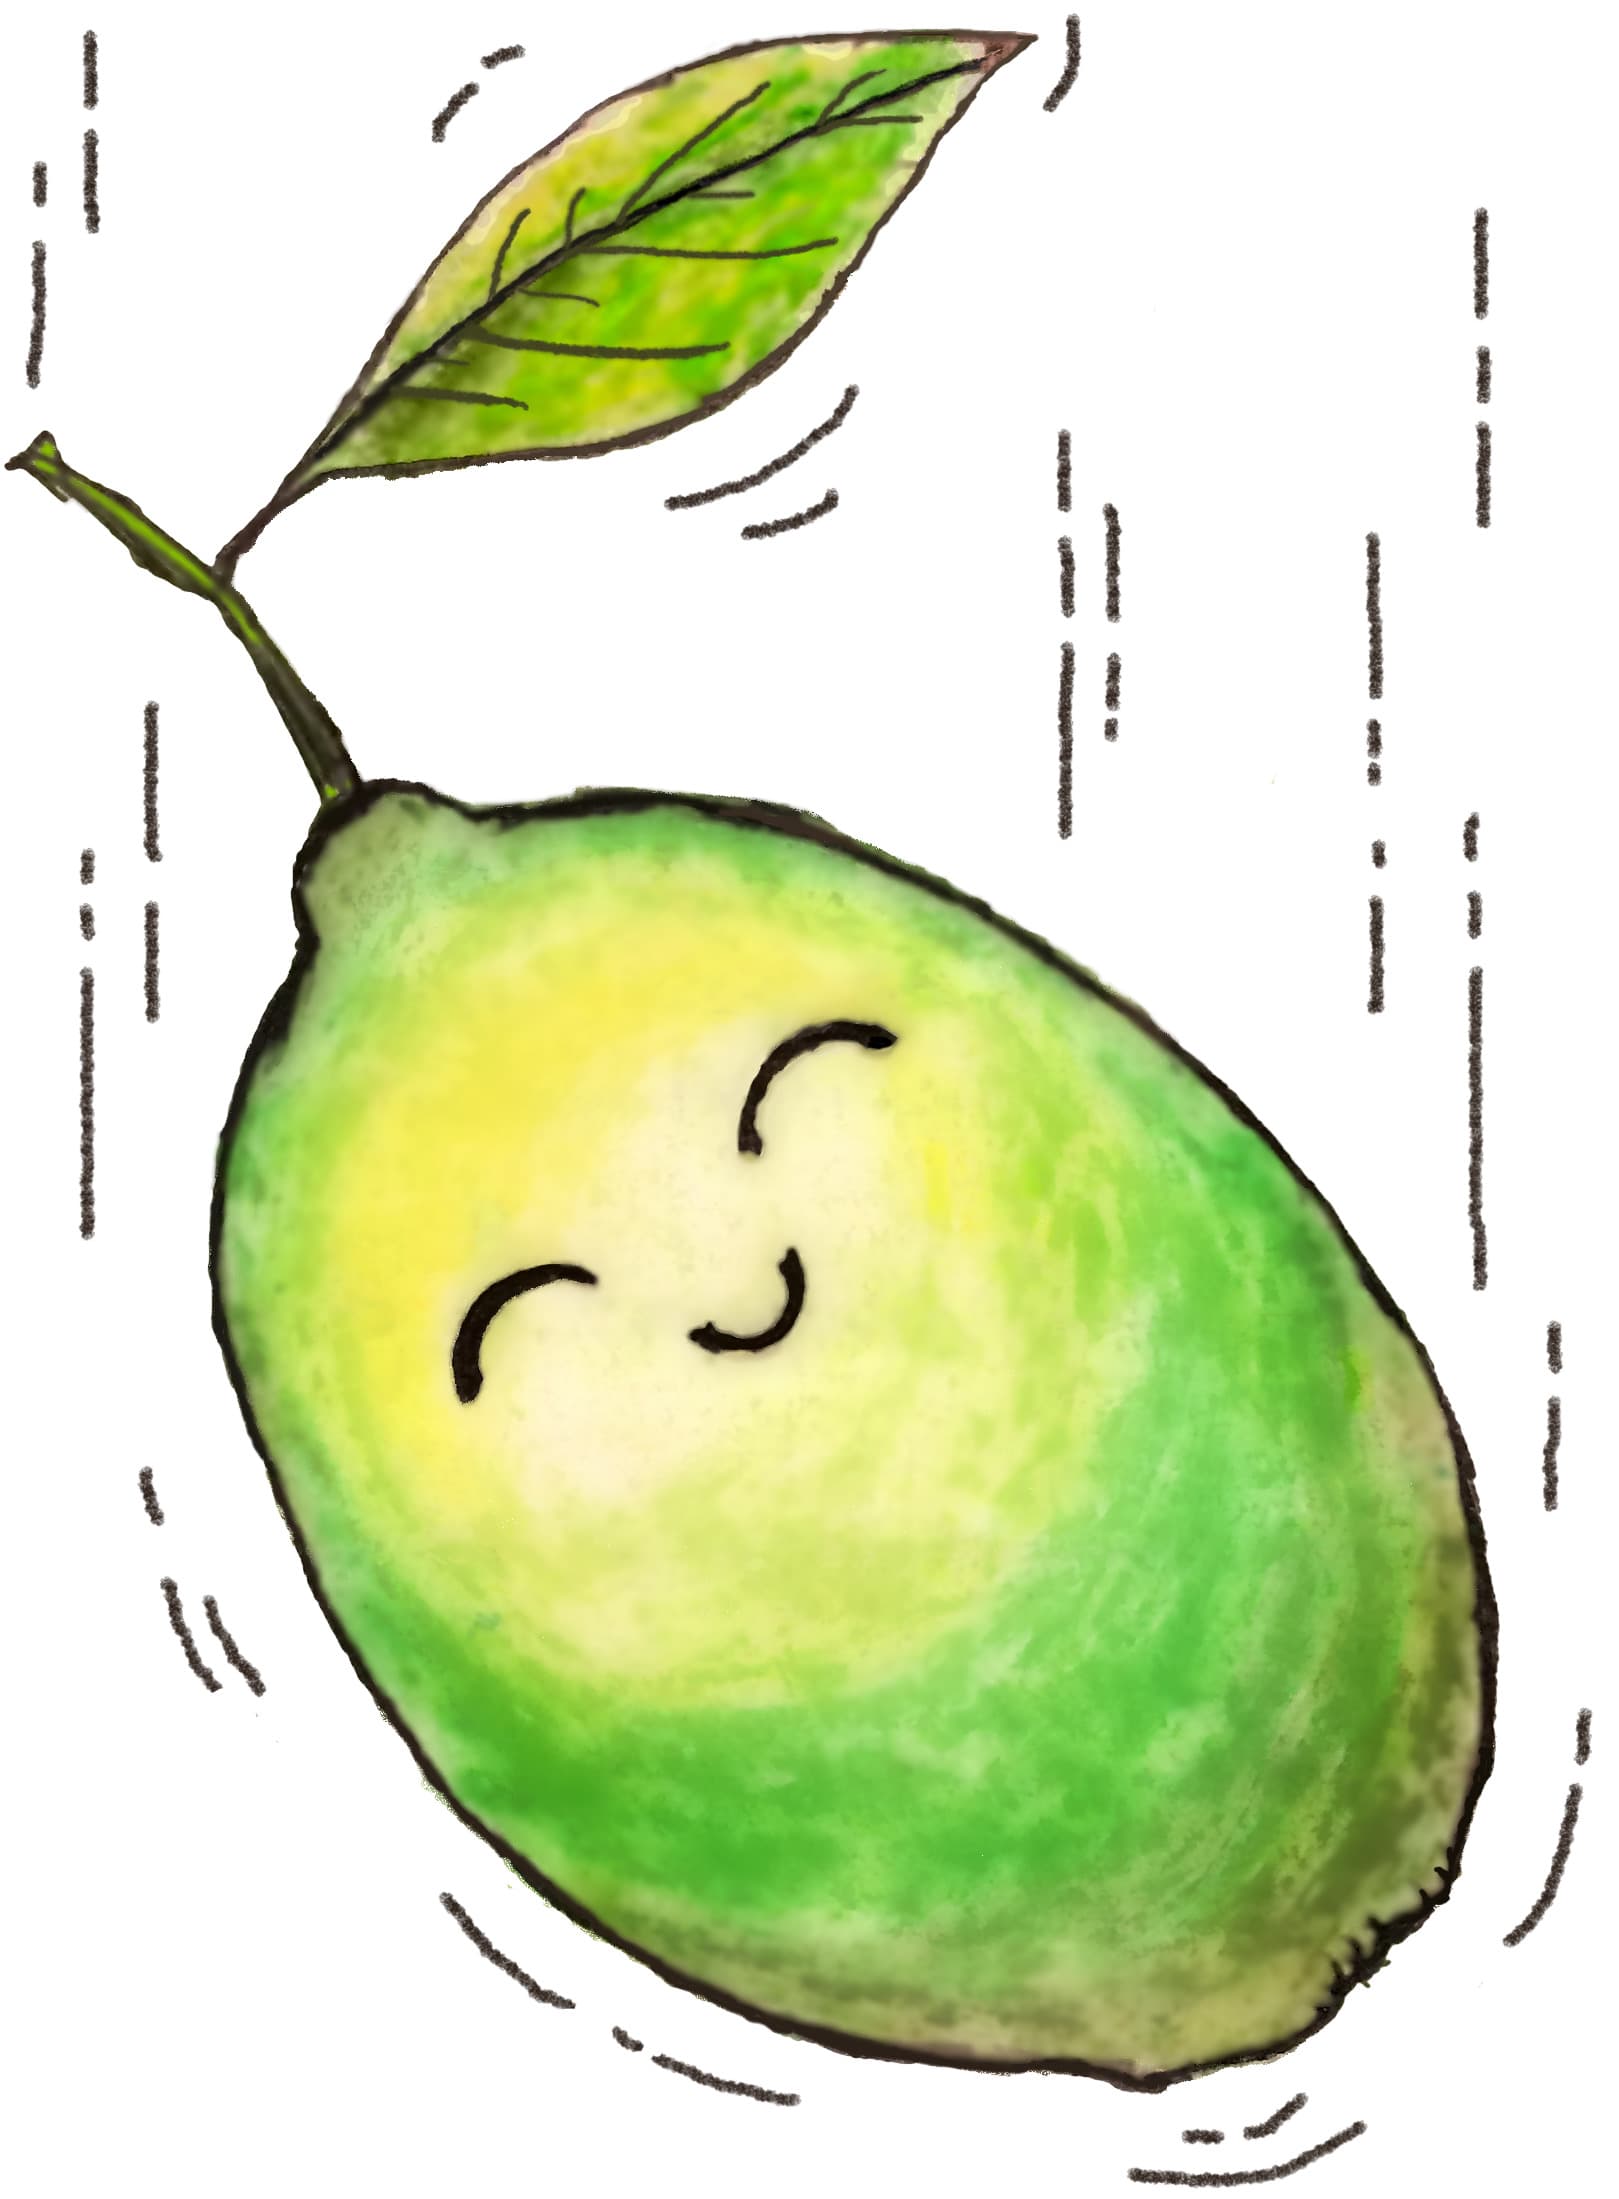 A happy lime in freefall